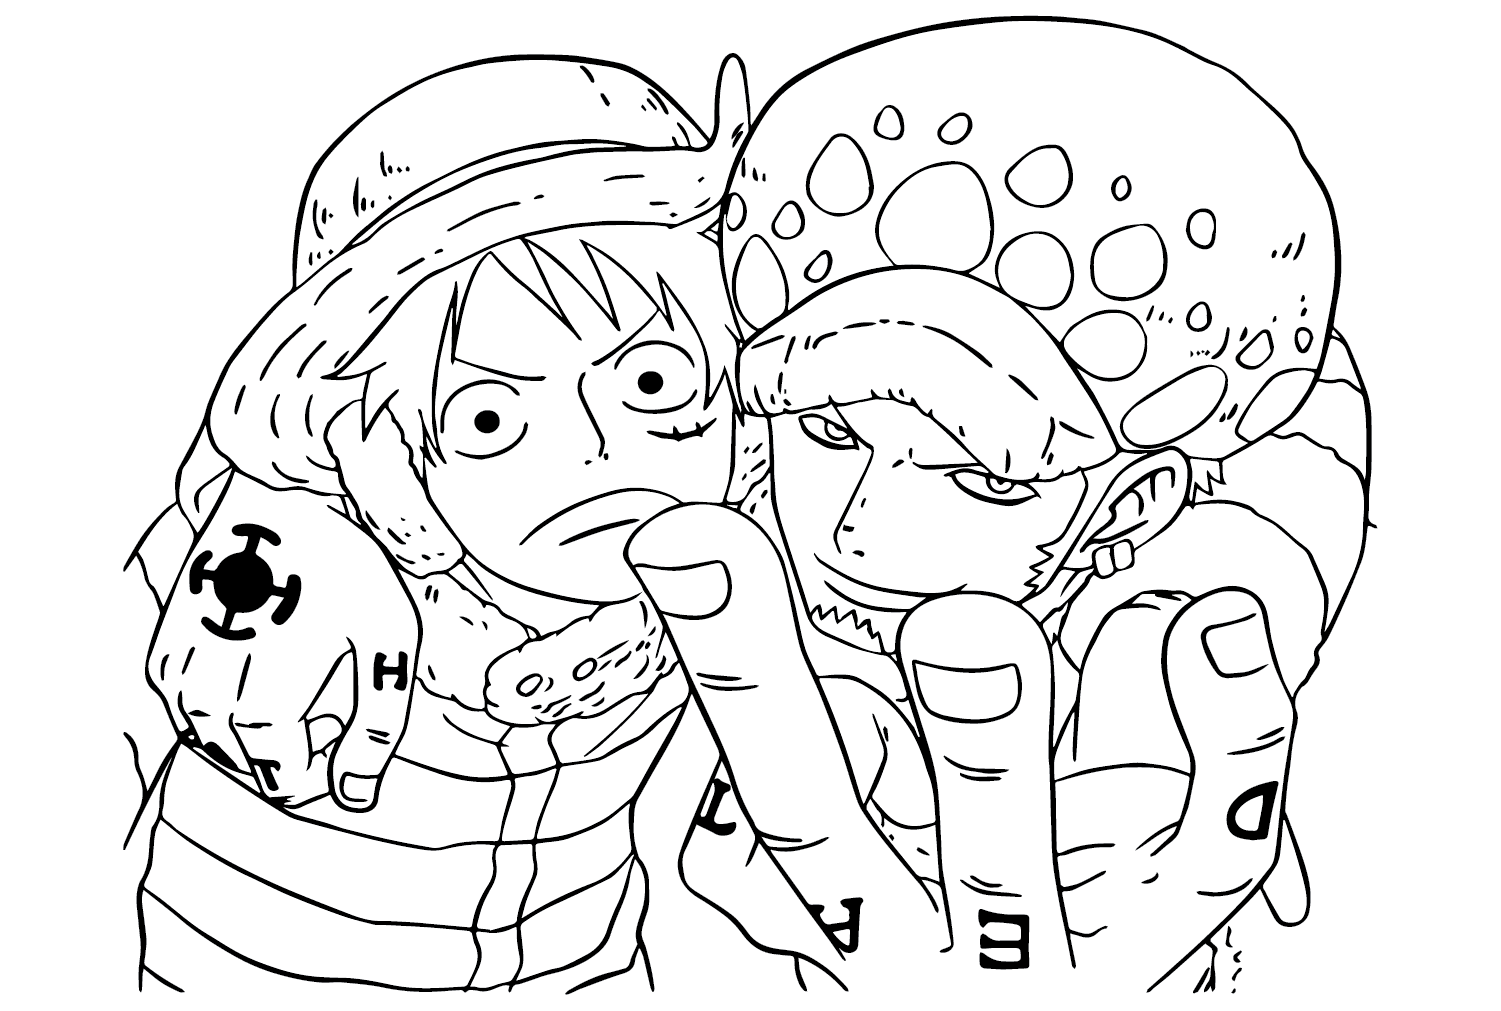 Luffy and Law Coloring Page from Luffy